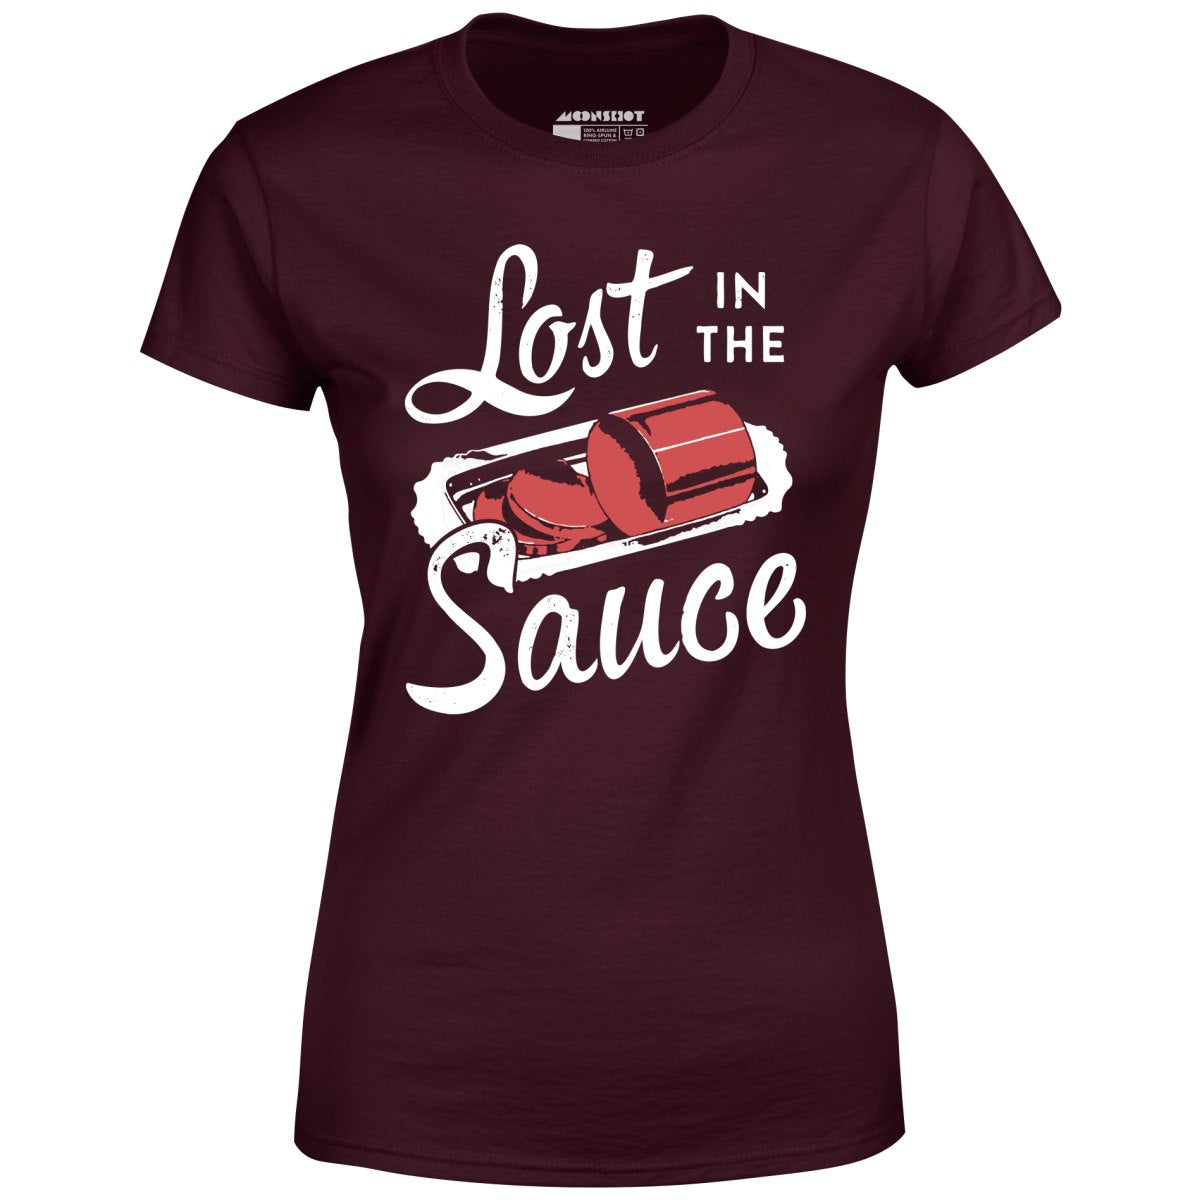 Lost in the Sauce - Women's T-Shirt